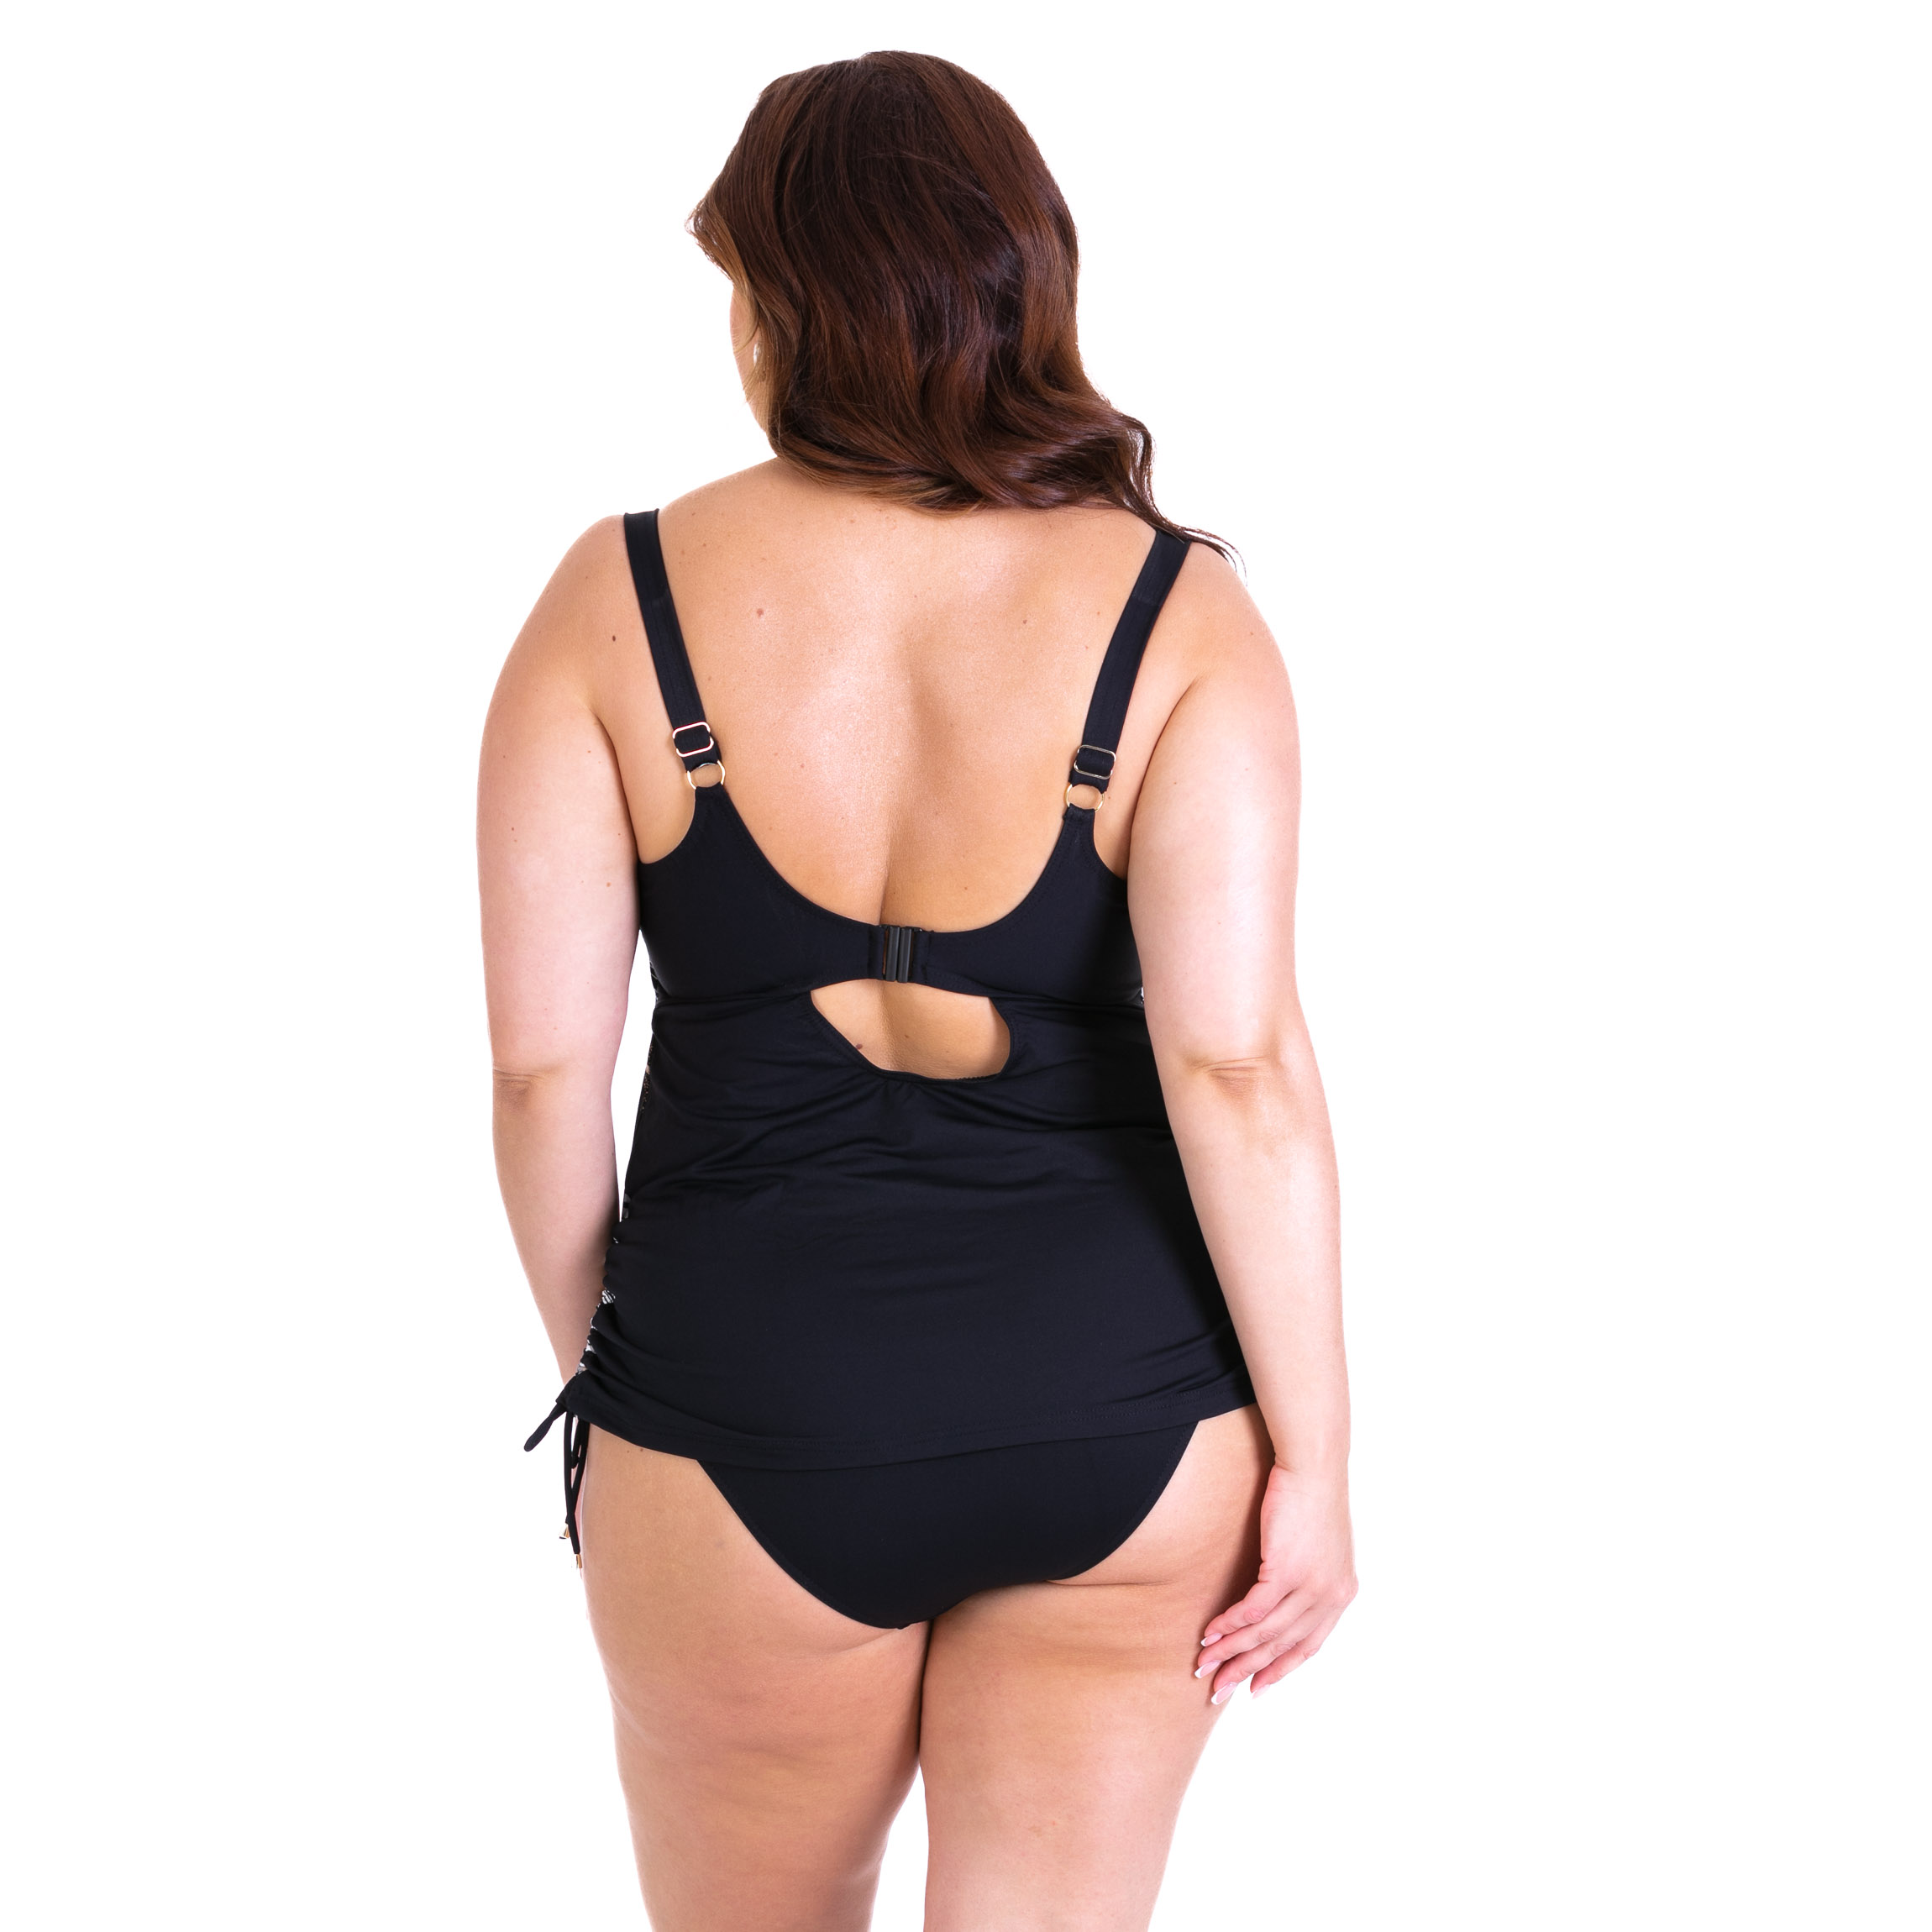 Tankini swimsuit / B1 - black two-piece swimsuit for large breasts